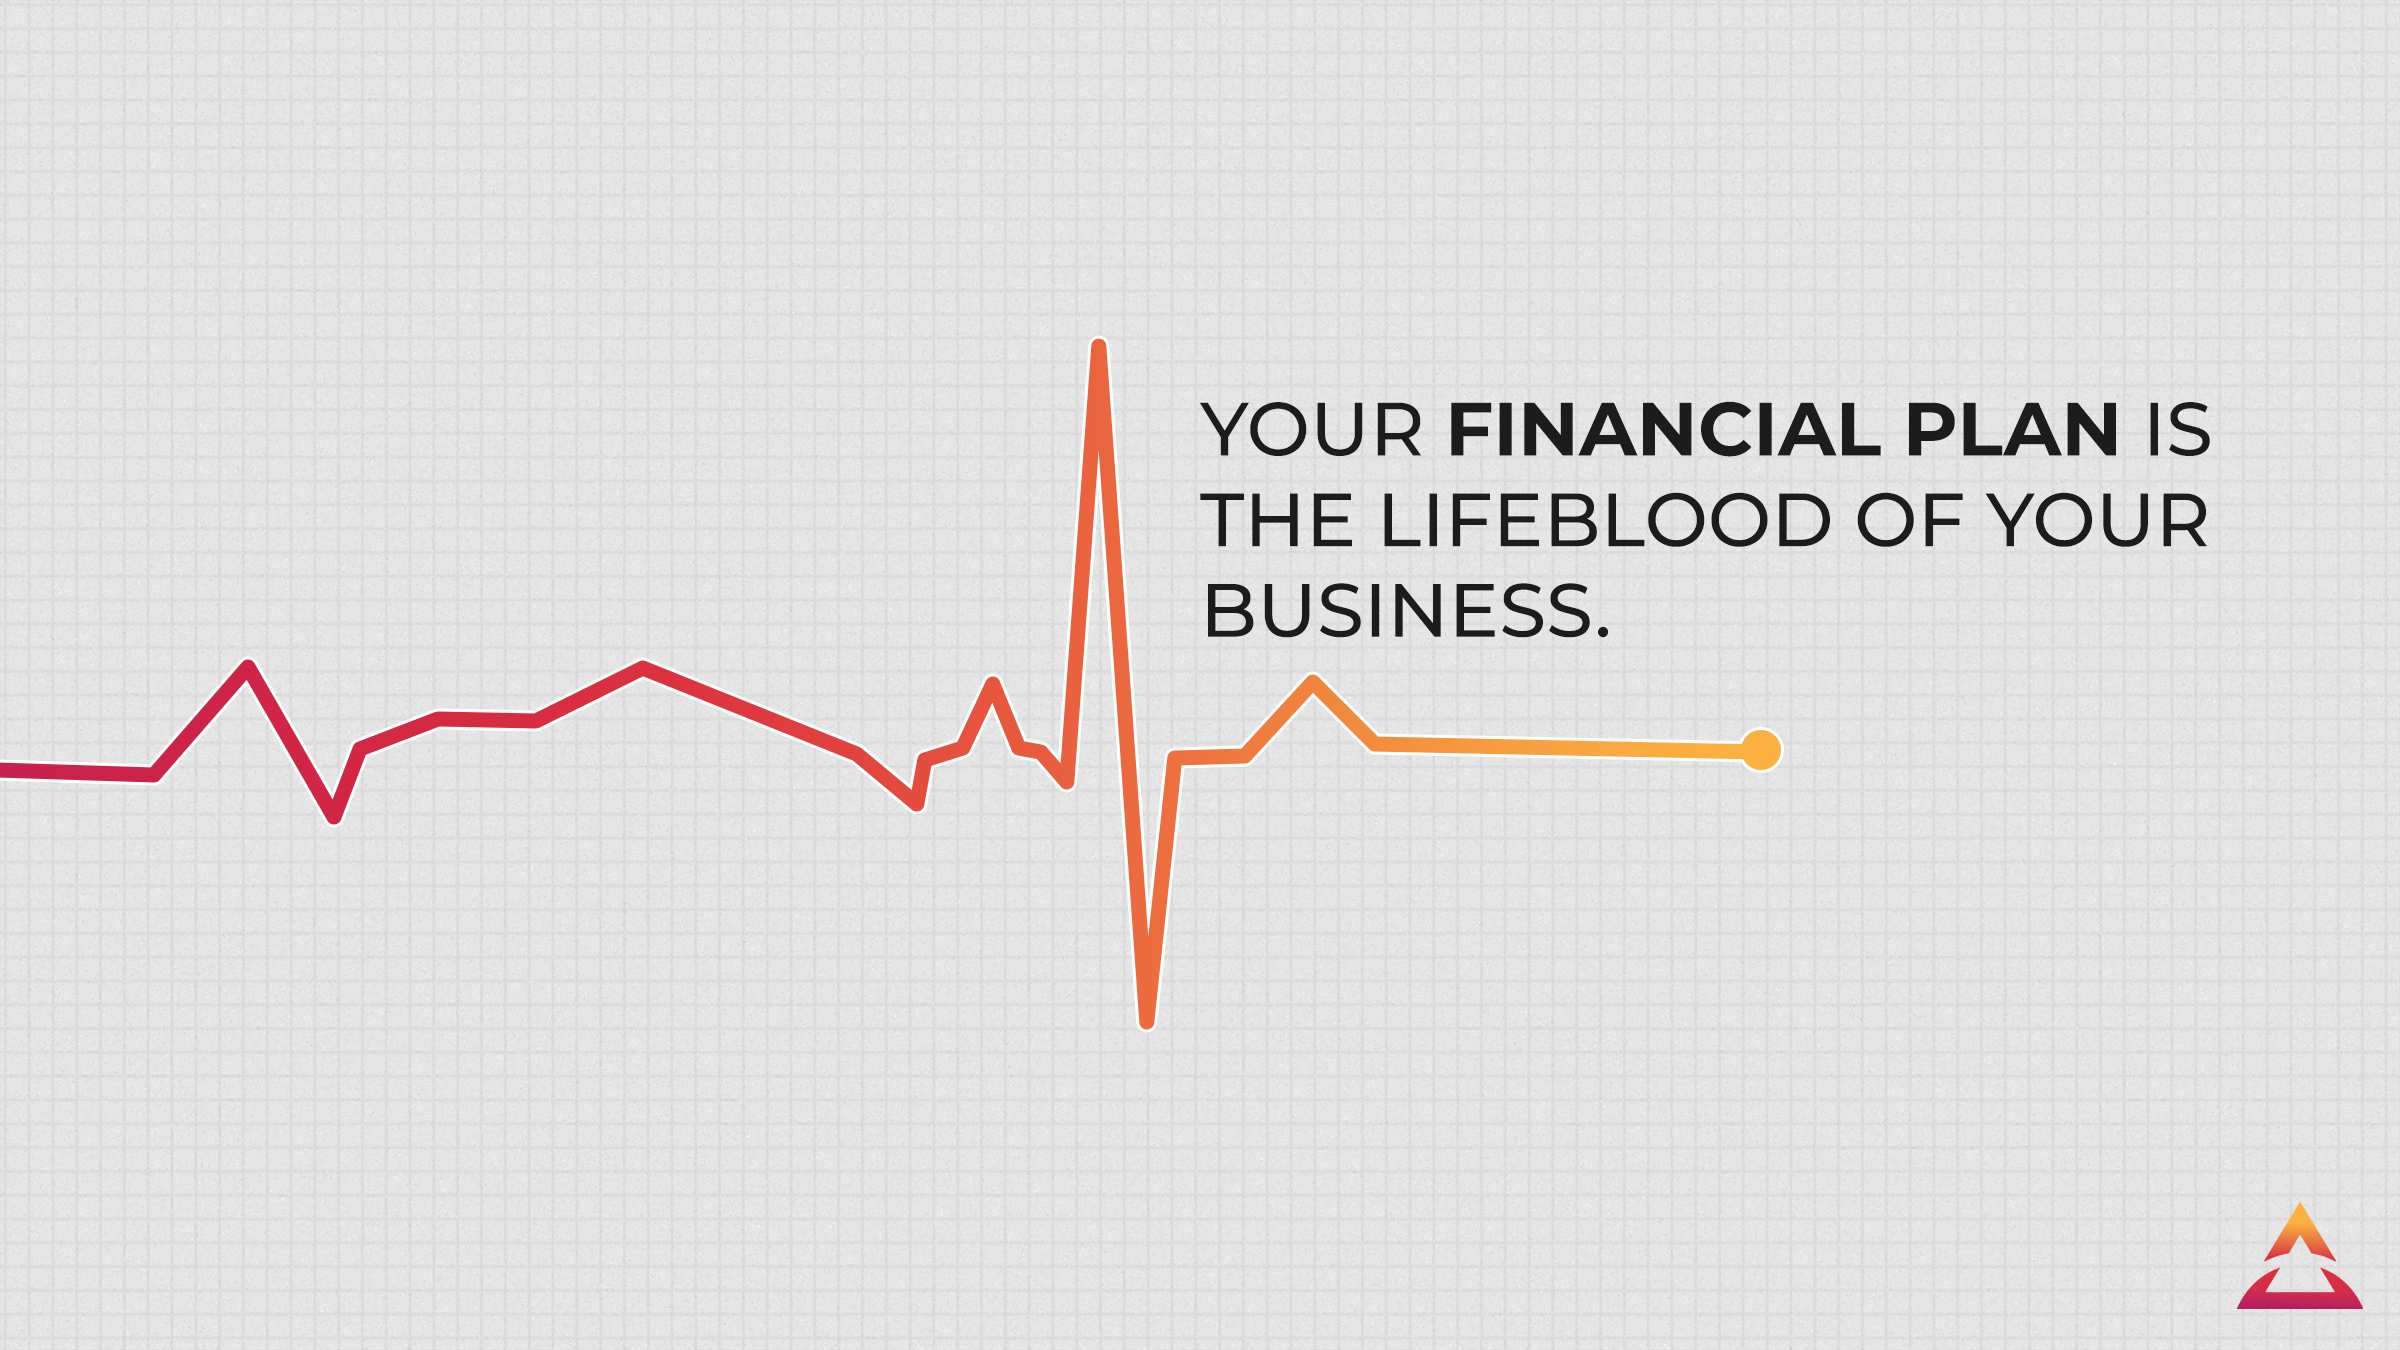 Heartbeat chart saying 'Your financial plan is the lifeblood of your business'